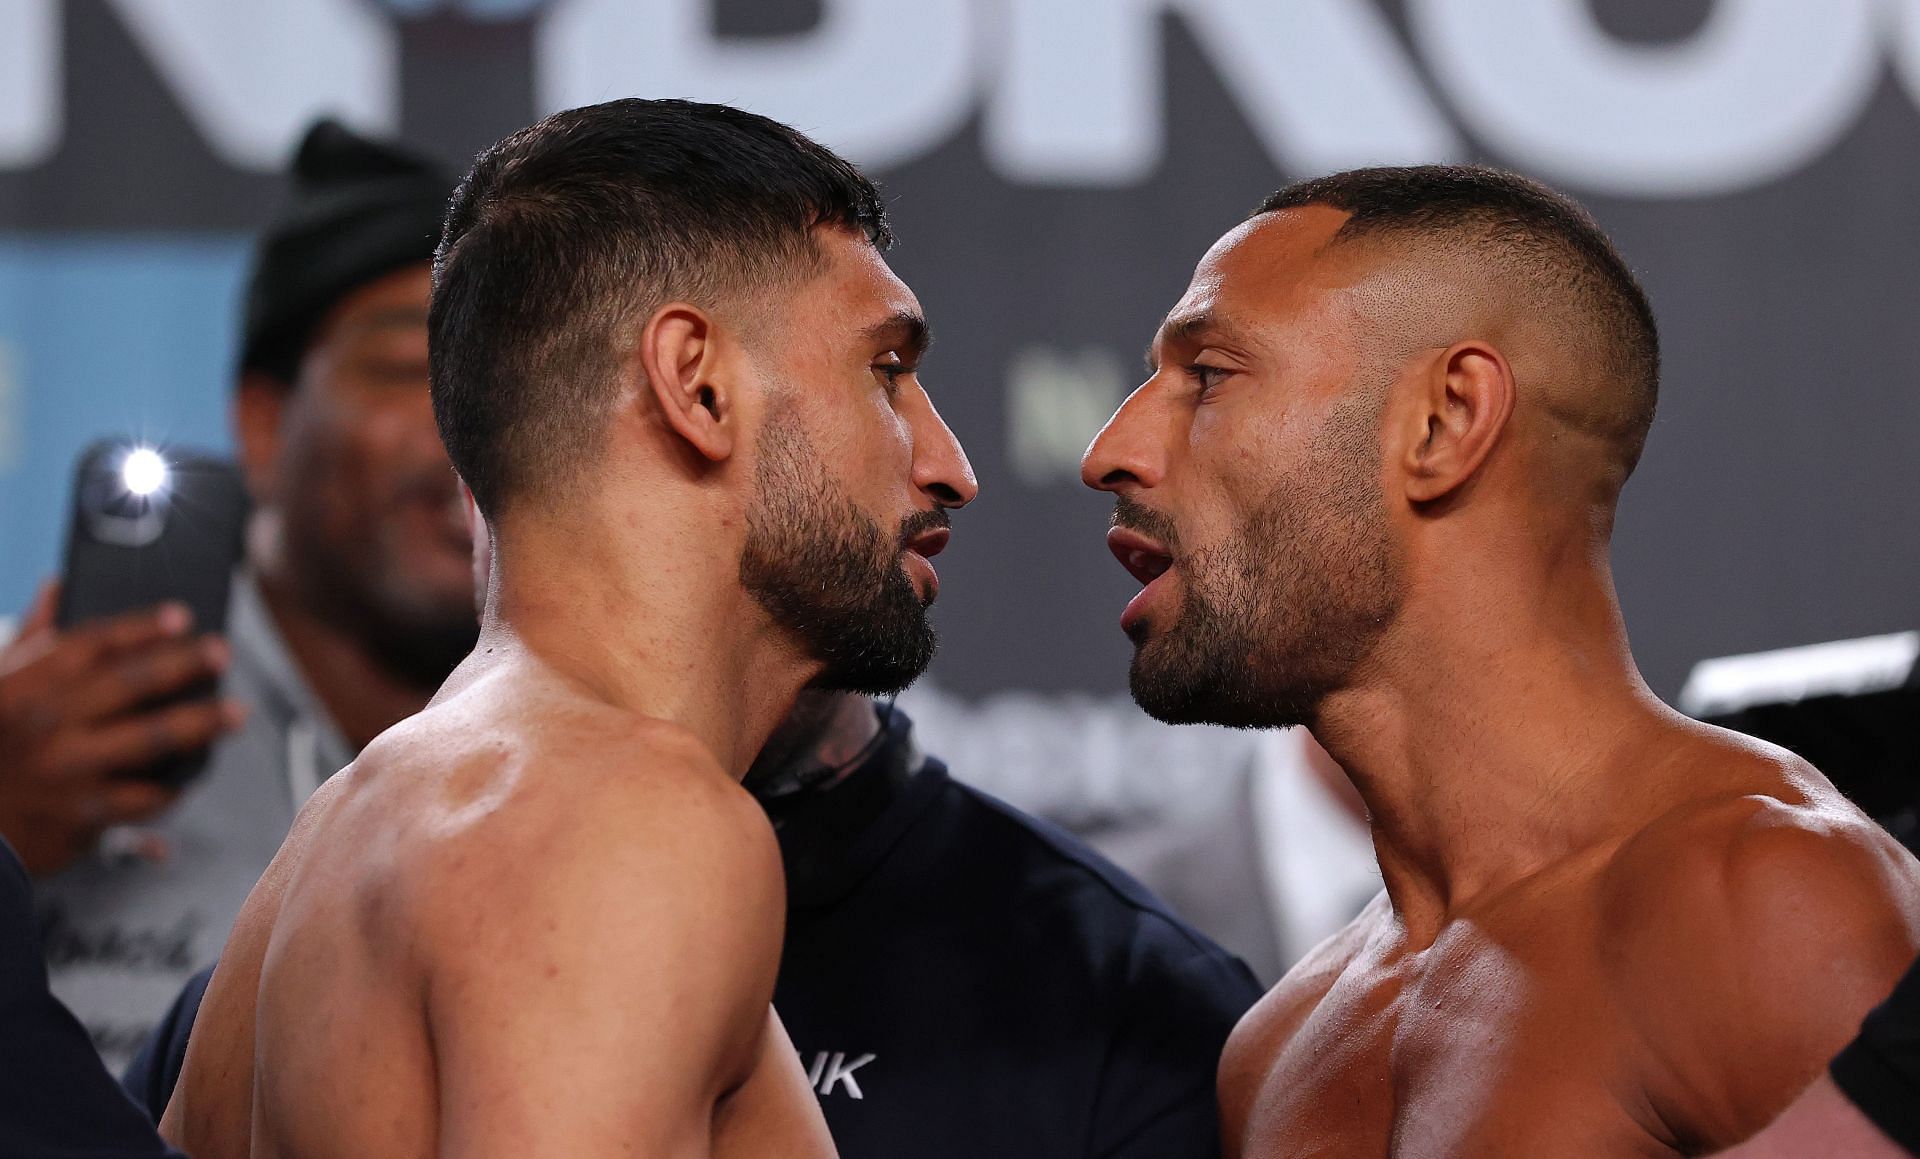 Amir Khan (L) and Kell Brook (R) finally clashed in the ring